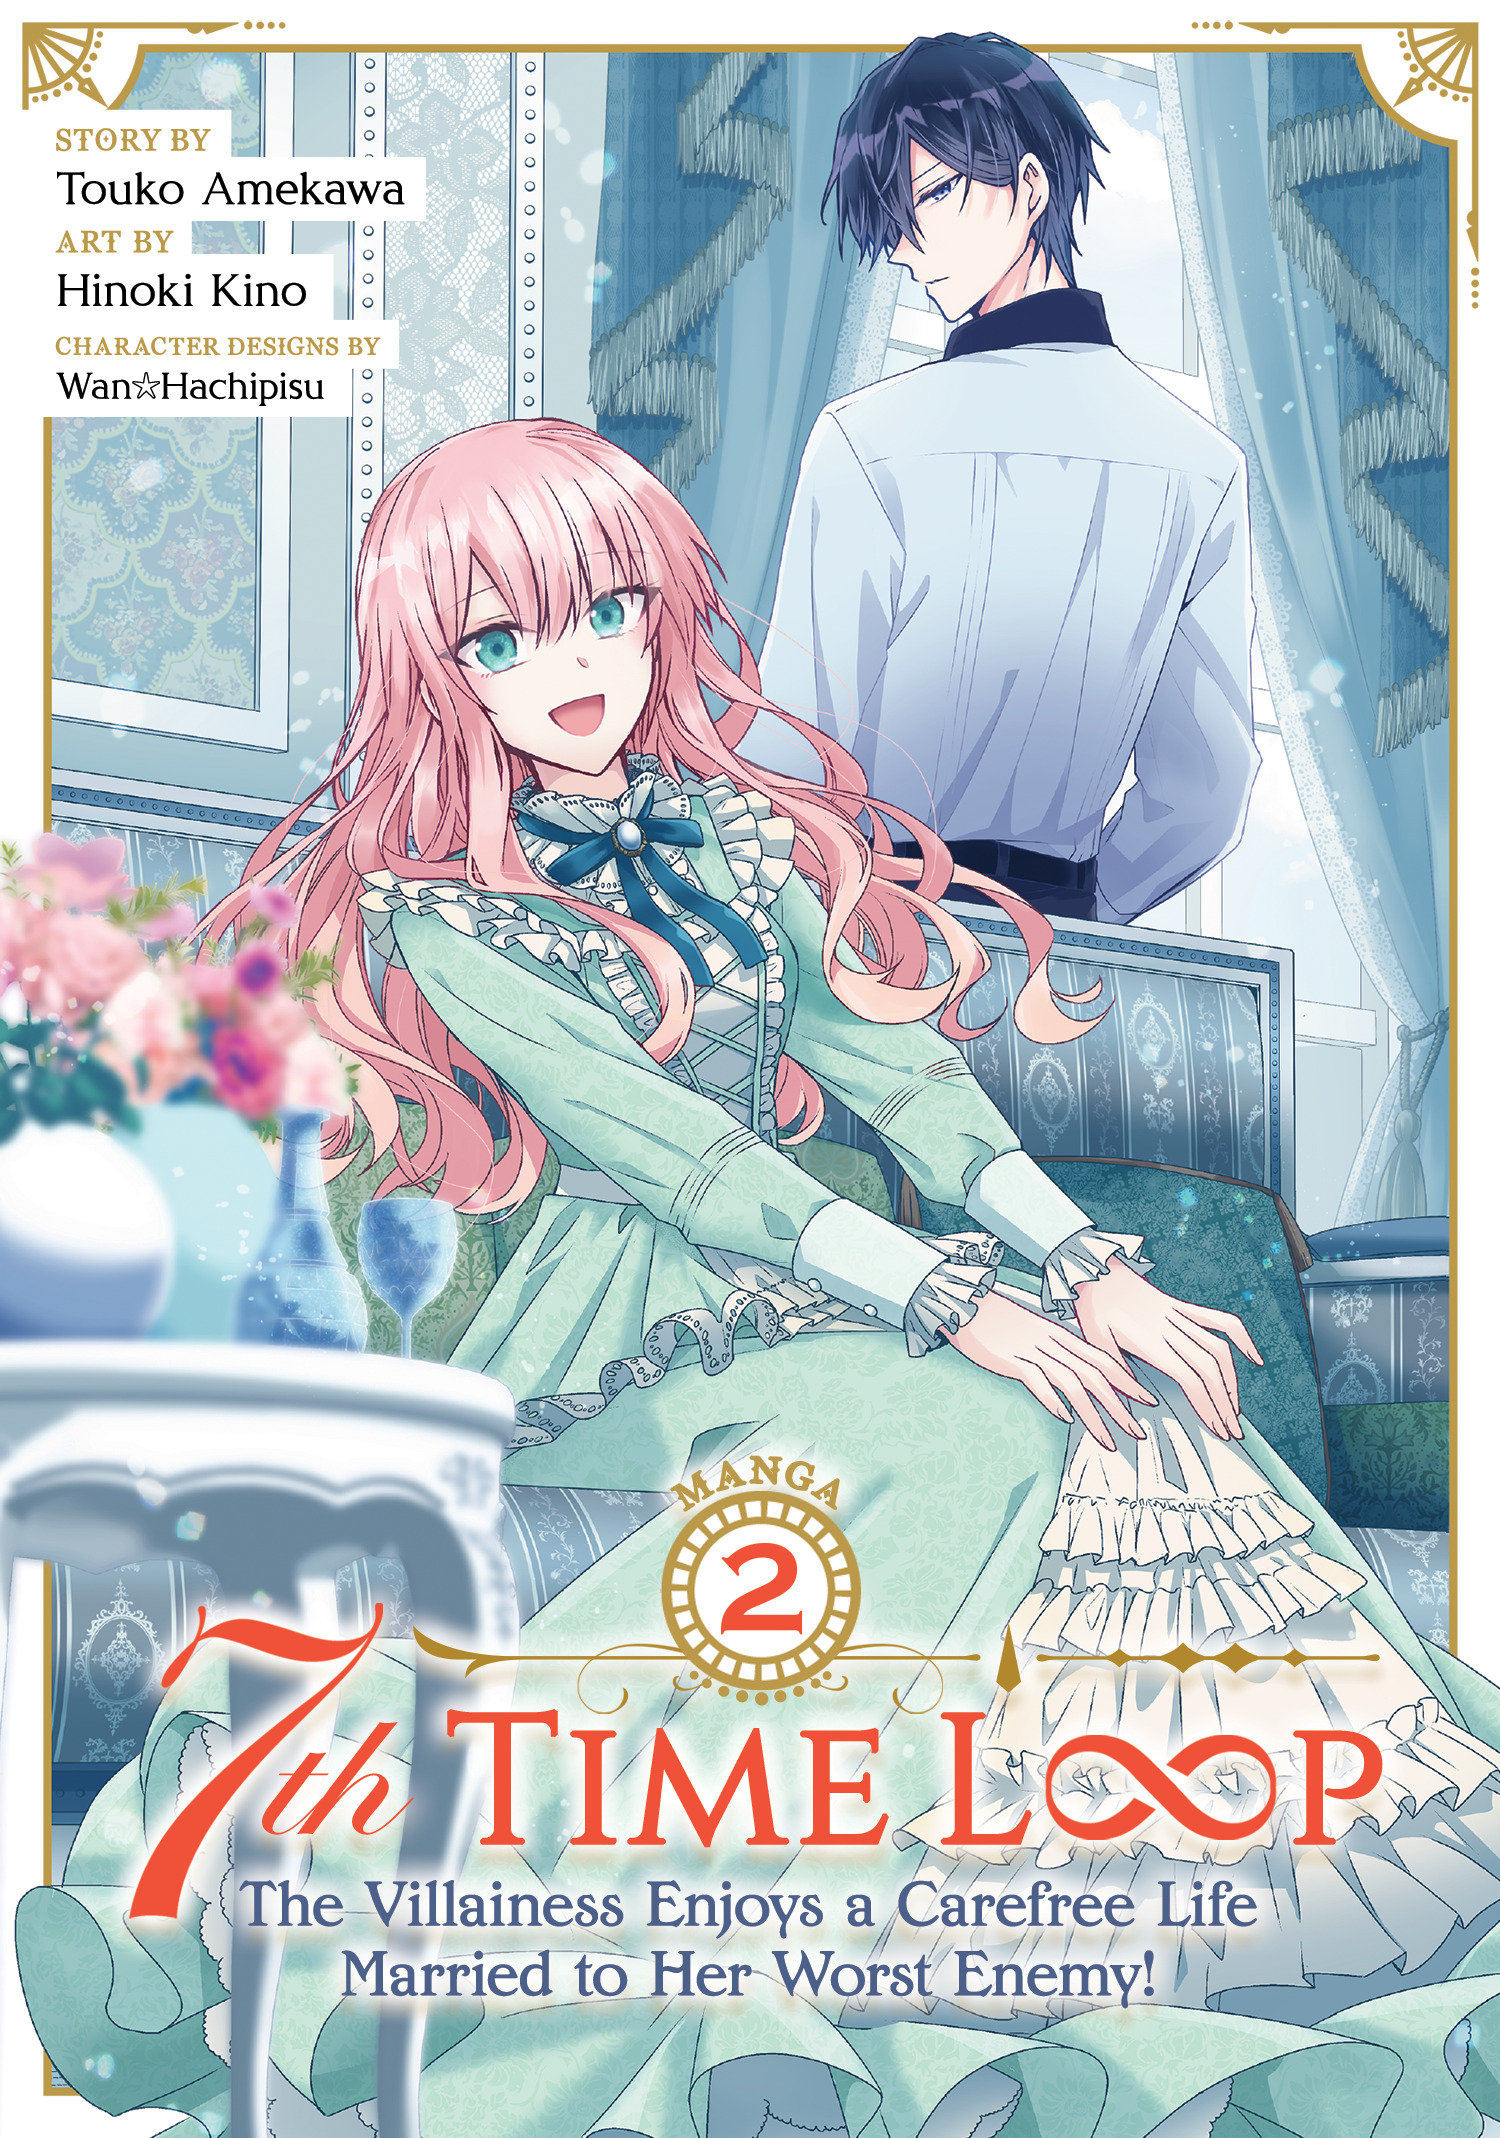 7th Time Loop the Villainess Enjoys a Carefree Life Married to Her Worst Enemy! Manga Volume 2